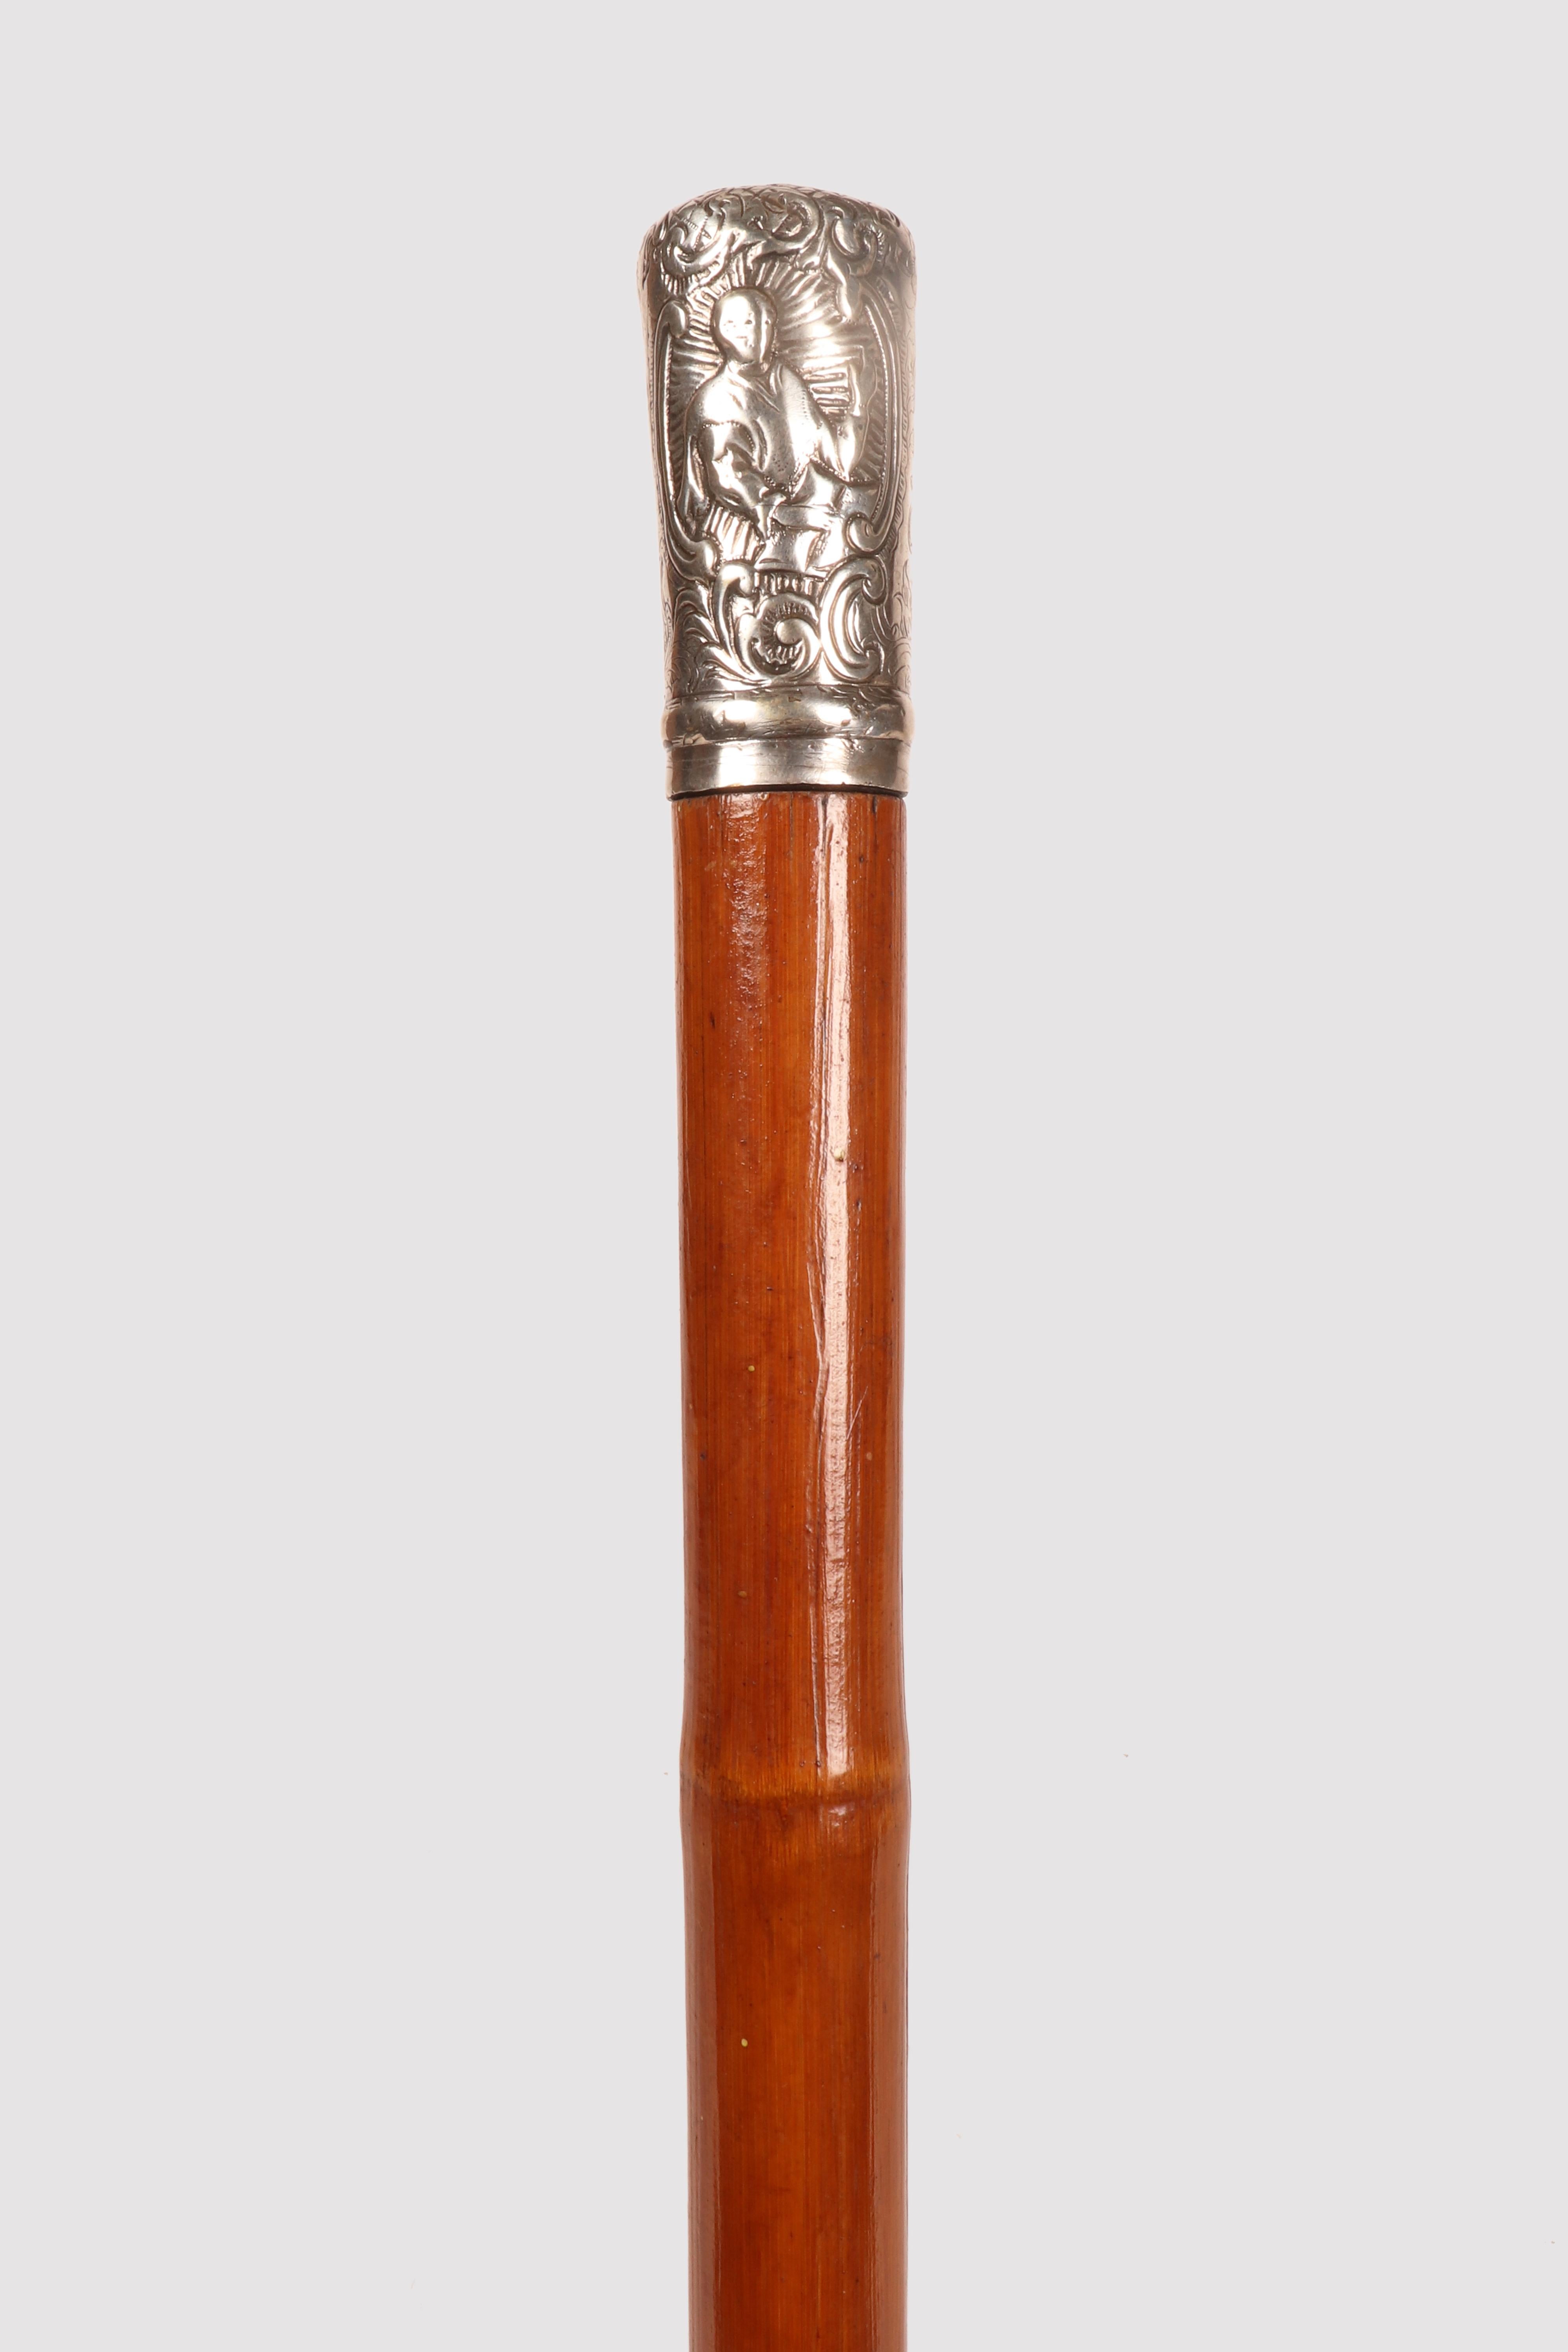 System walking stick: Probing stick, used by customs officials to push bales of cotton or other goods, looking for items on which a duty was to be paid. Bamboo wood barrel, silver knob, iron tip. By extracting the knob, a square-section iron rod